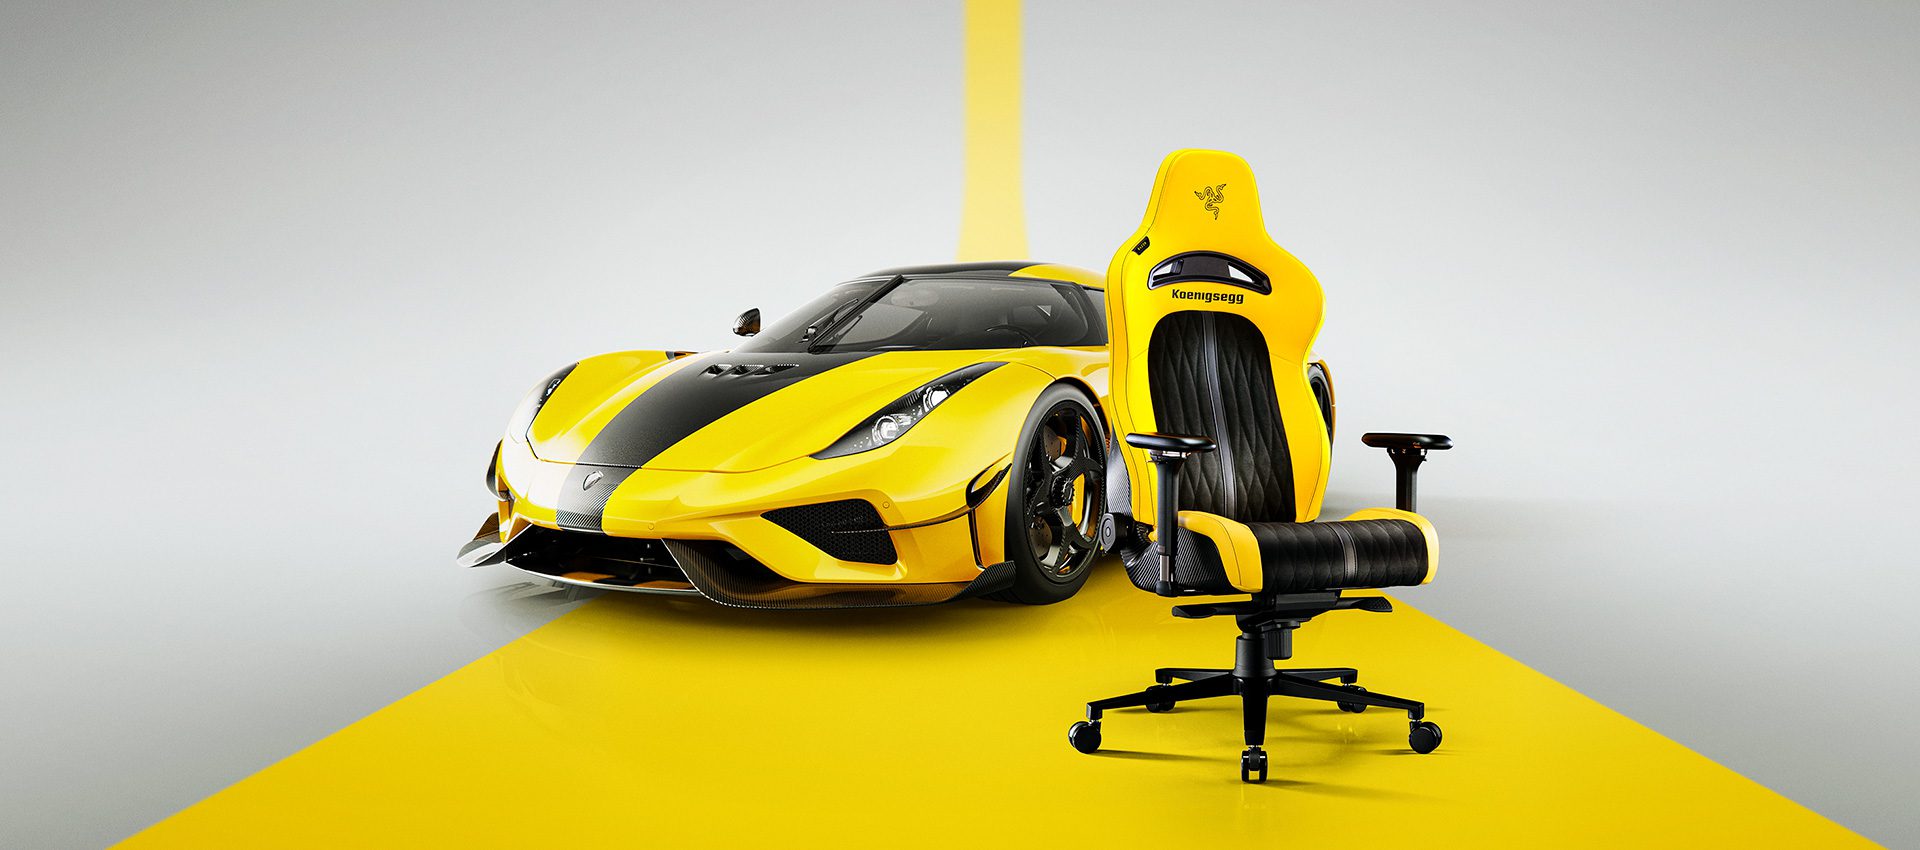 Koenigsegg and Razer have partnered up to create a race inspired gaming chair in yellow